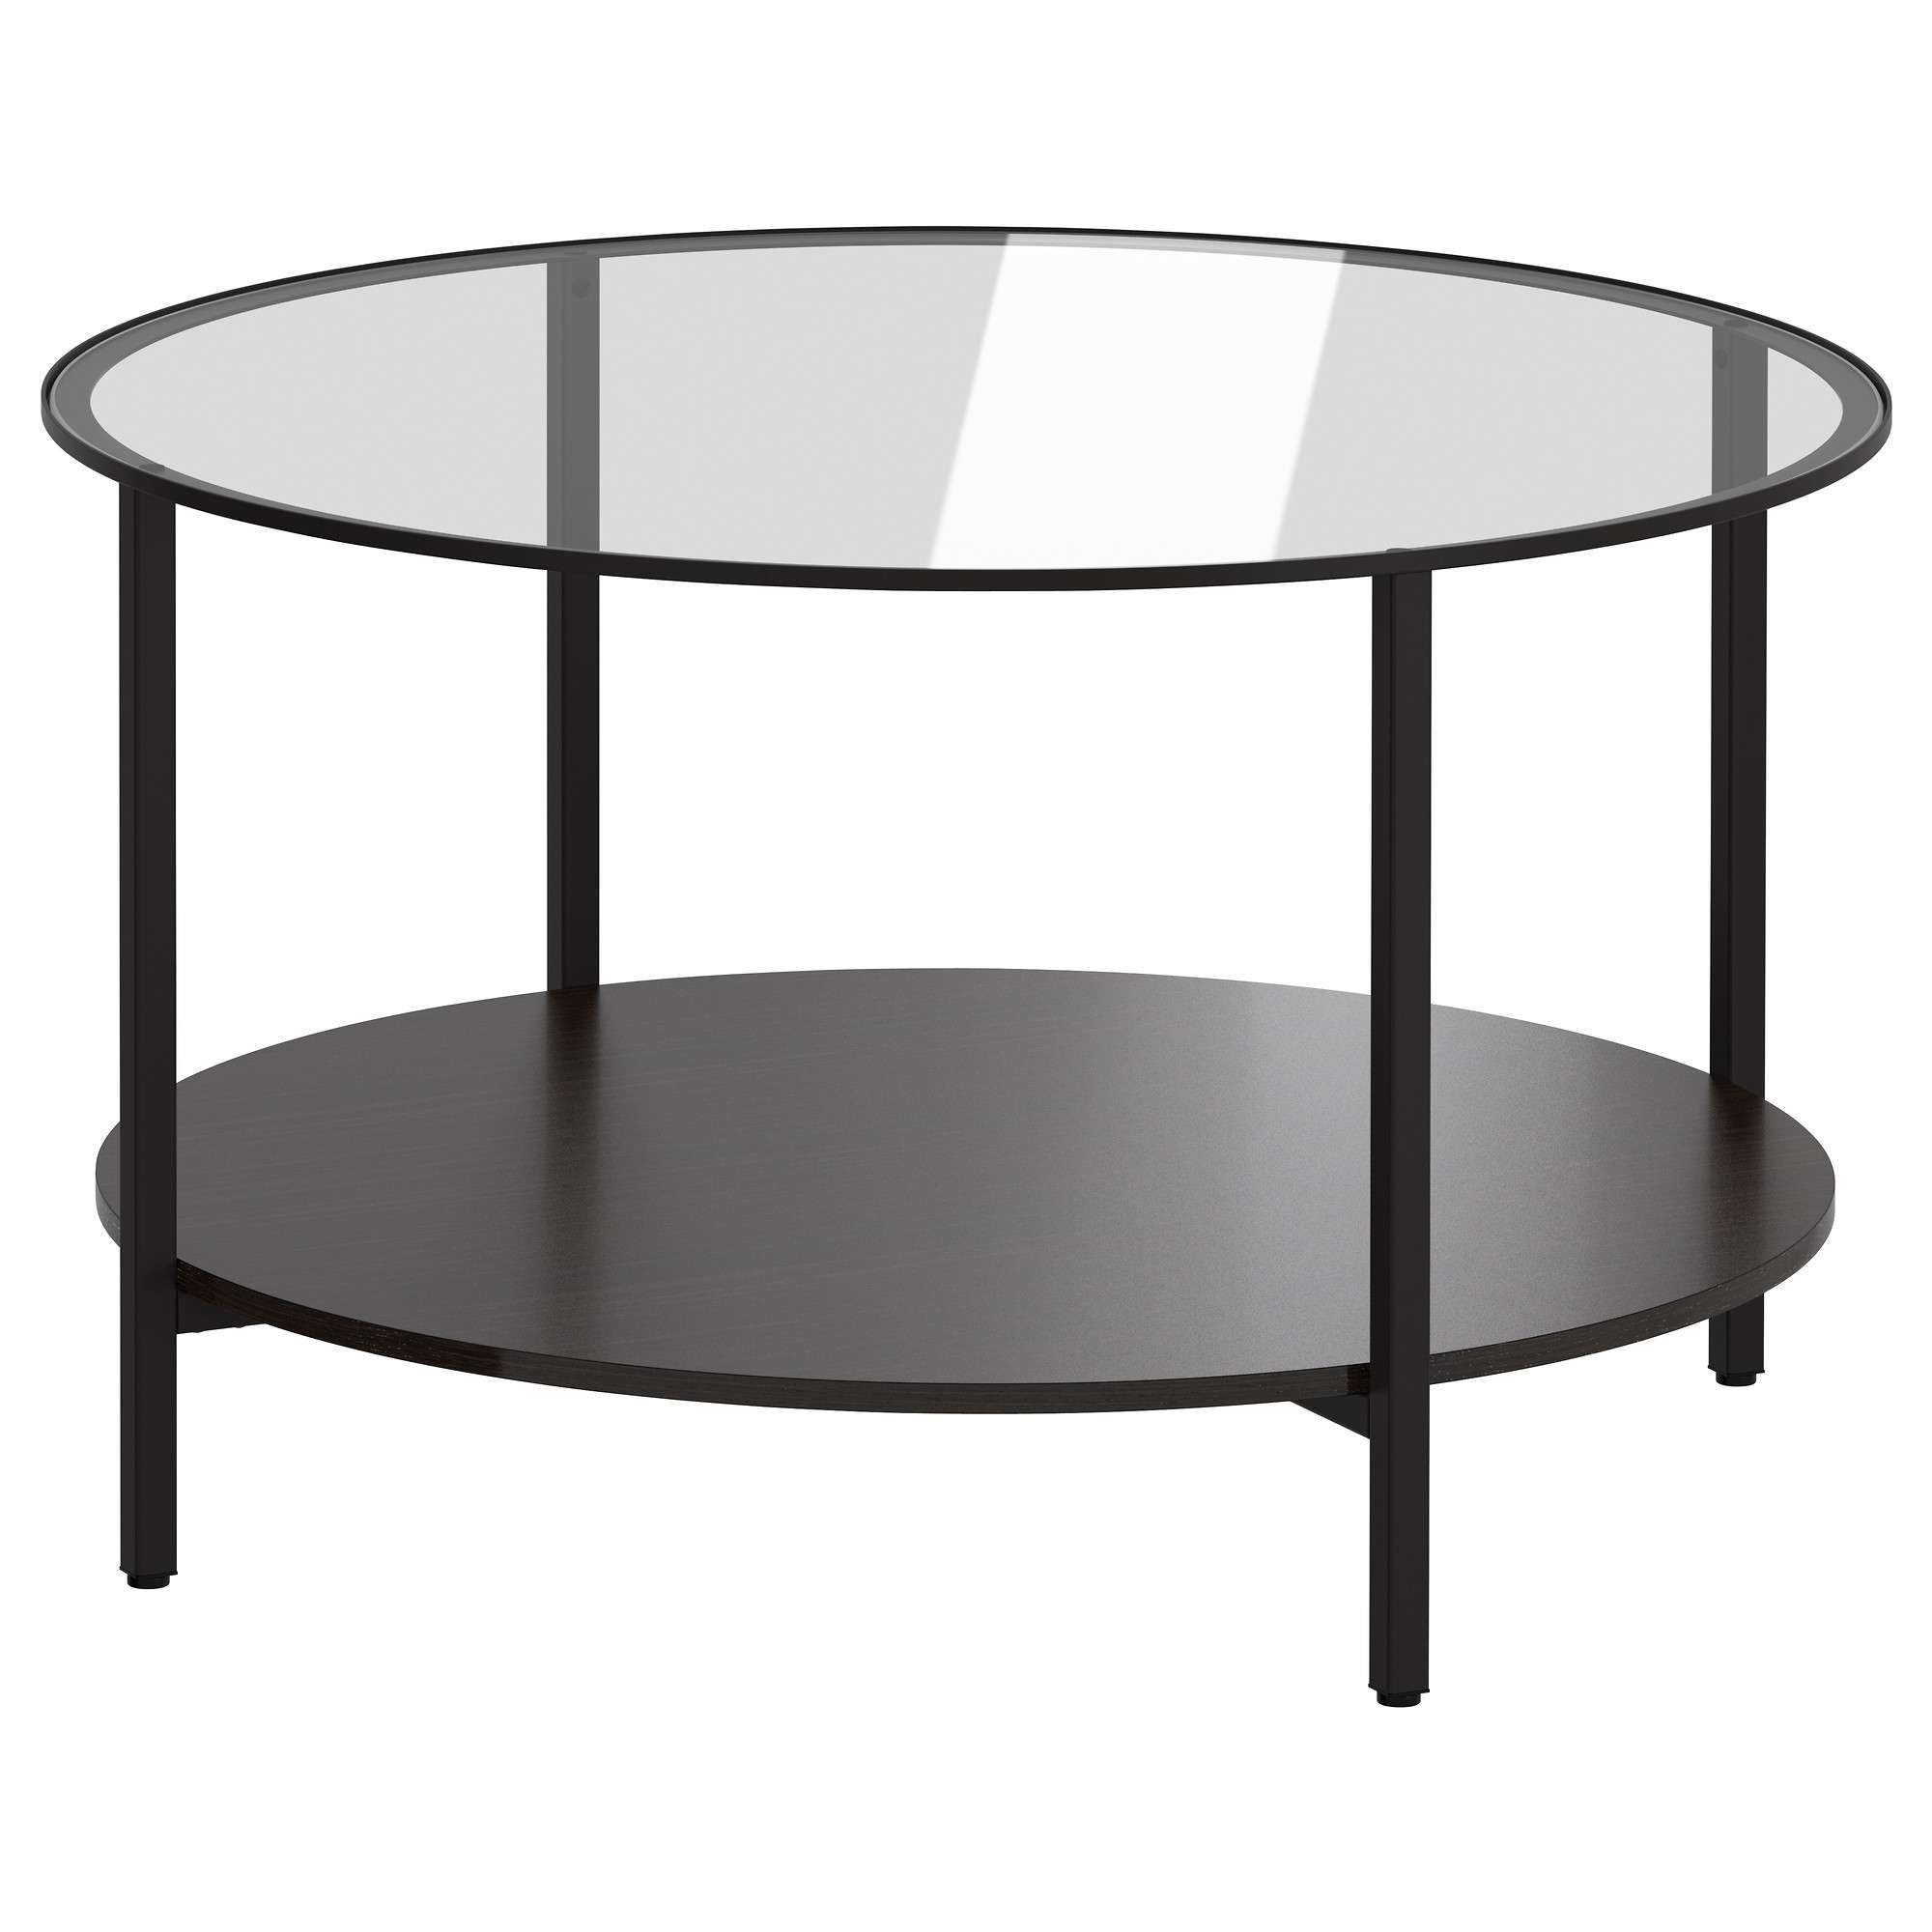 Most Current Glass Circular Coffee Tables Inside Vittsjö Coffee Table – Black Brown/glass – Ikea (View 6 of 20)